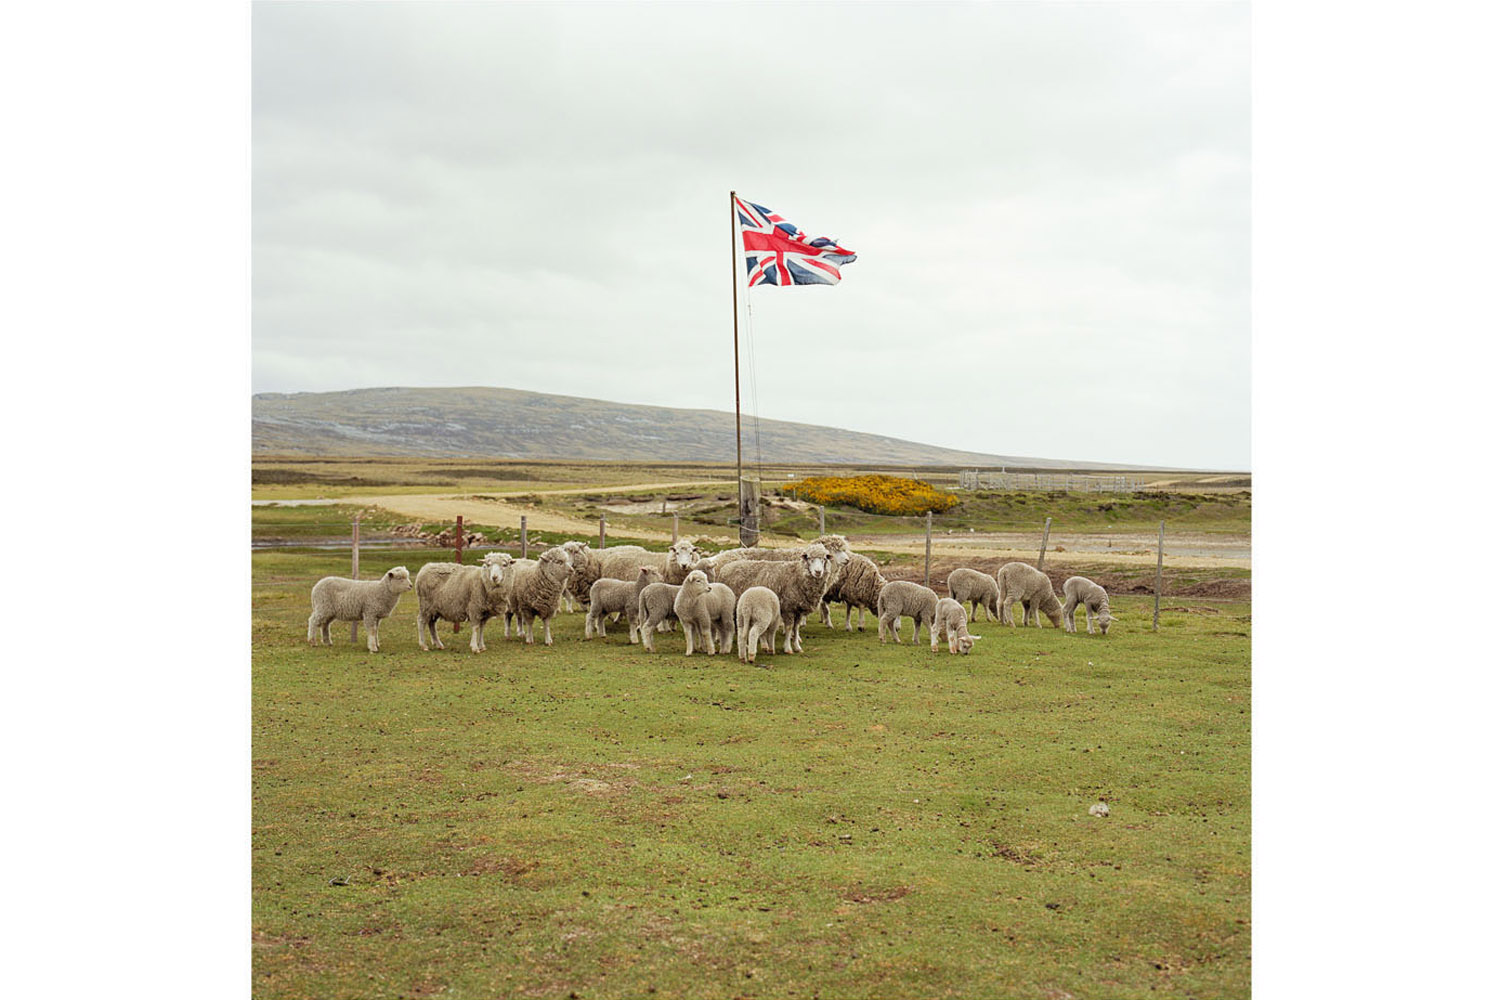 Sheep wait to be shorn while standing under the Union Jack flag, Long Island Farm, East Falkland, Falkland Islands. Farmland on the Falklands extends to well over 1 million hectares, carrying approximately 600,000 sheep. Before 1979 there were 36 farms in the Islands, with wealthy owners living back in the UK. As a result of Government policy, the land was split up to create a total of 88 individual smaller farms, and are mostly run as family units. (Jon Tonks—Reportage by Getty Images)